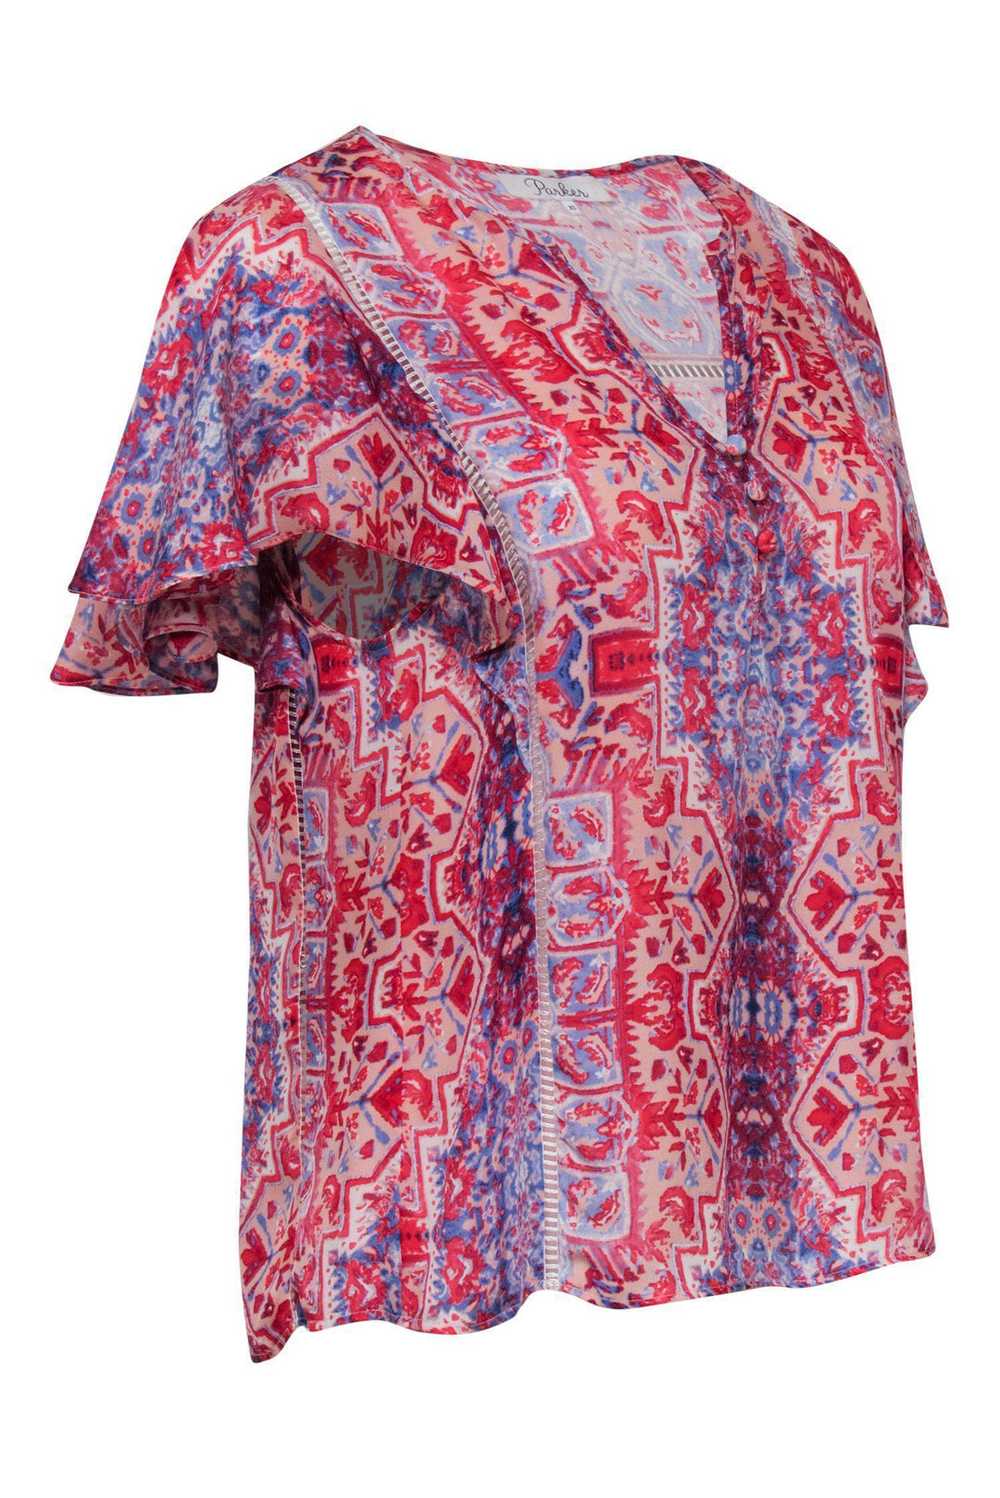 Parker - Red & Blue Ruffle Sleeve Printed Blouse … - image 2